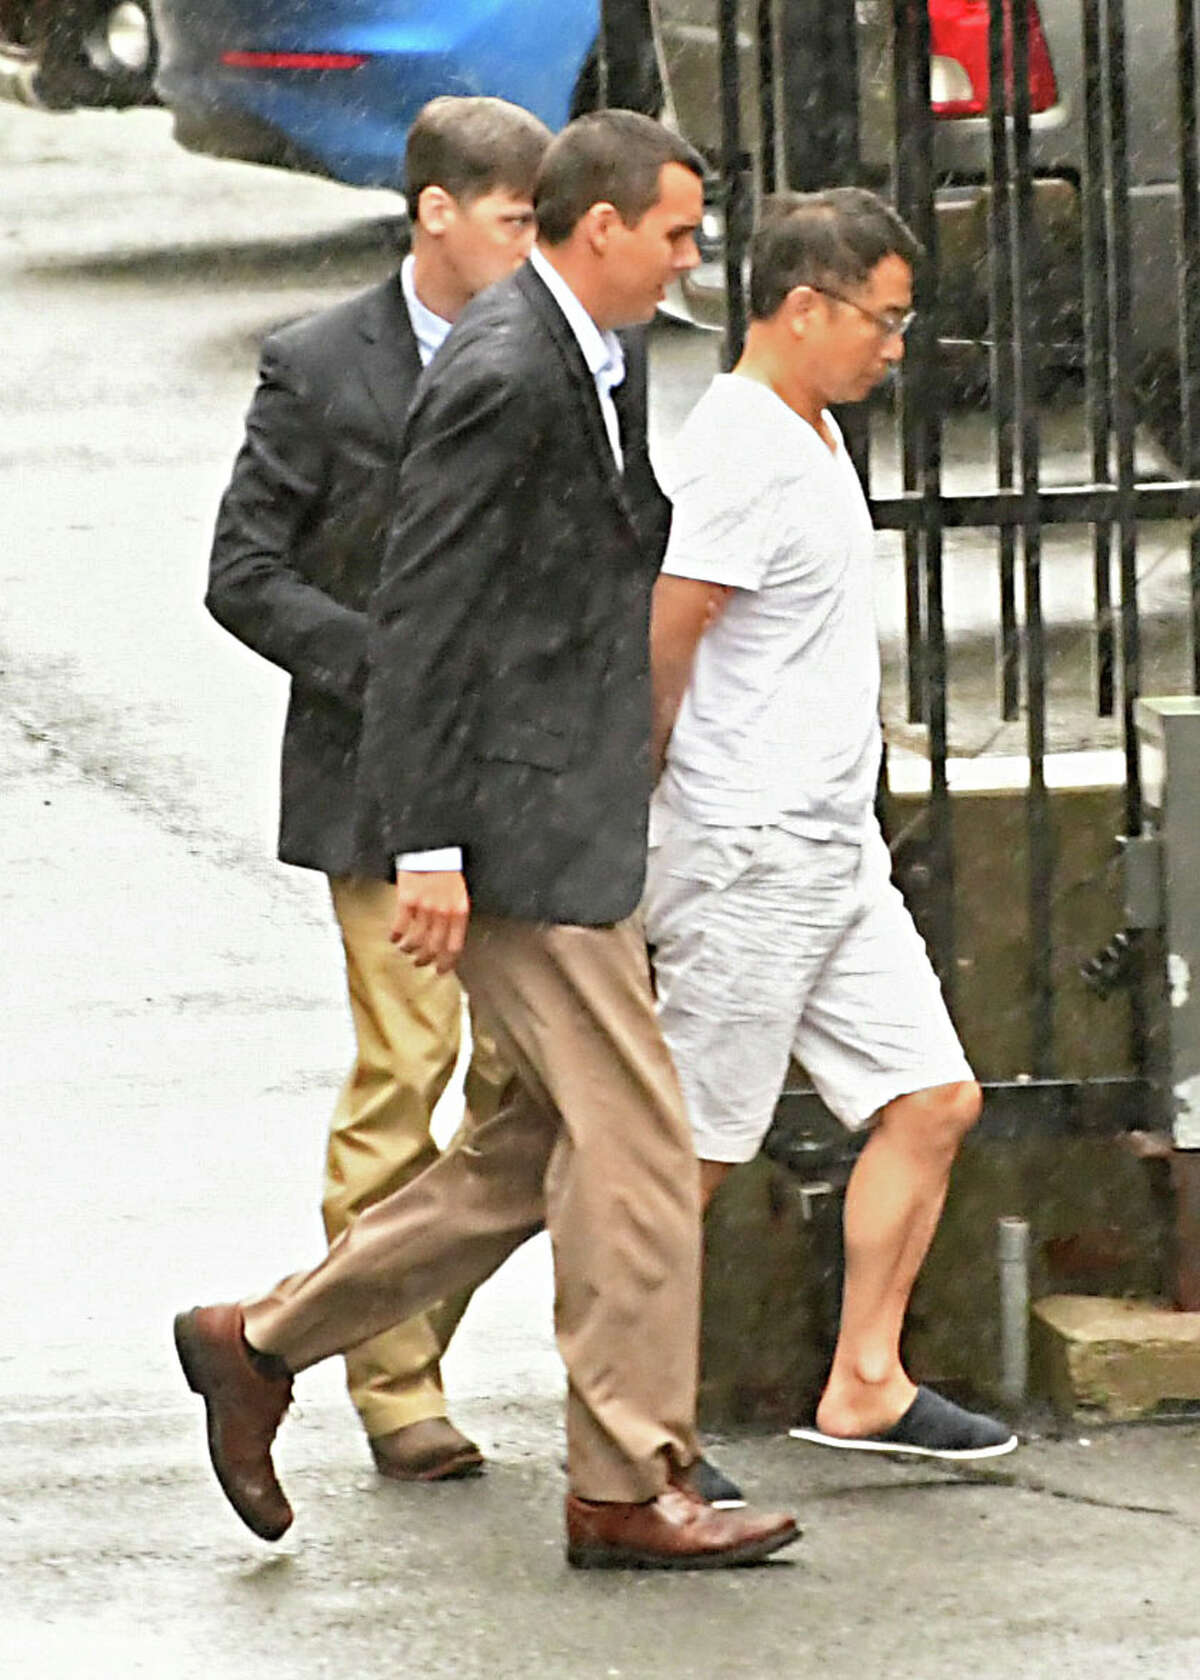 FBI agents escort General Electric engineer Xiaoqing Zheng to his arraignment at U.S. District Court in Albany on charges of theft of trade secrets.(Lori Van Buren/Times Union)